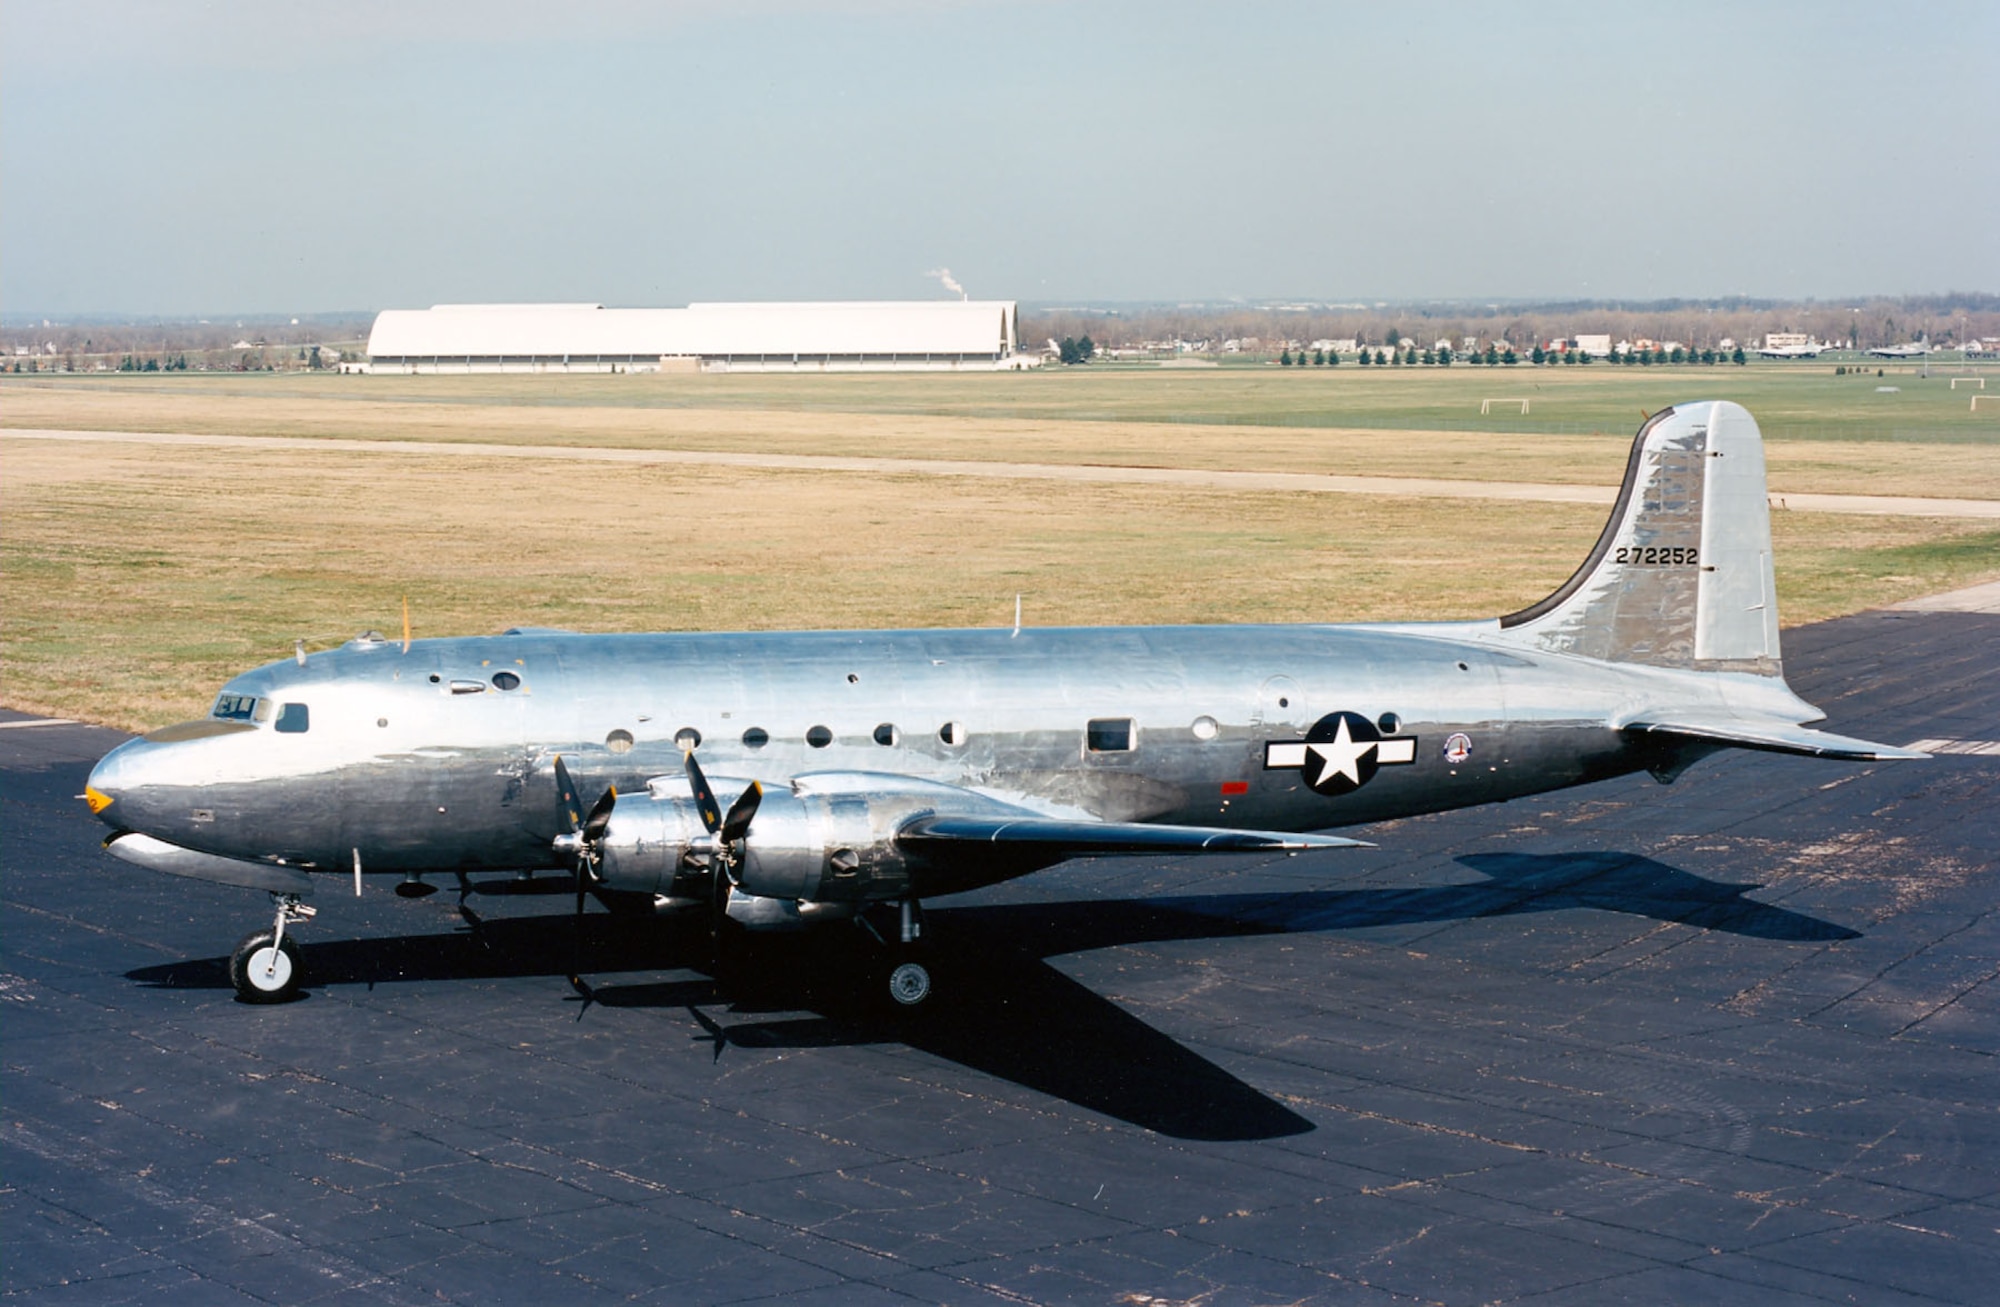 DAYTON, Ohio -- Douglas VC-54C "Sacred Cow" at the National Museum of the United States Air Force. (U.S. Air Force photo)